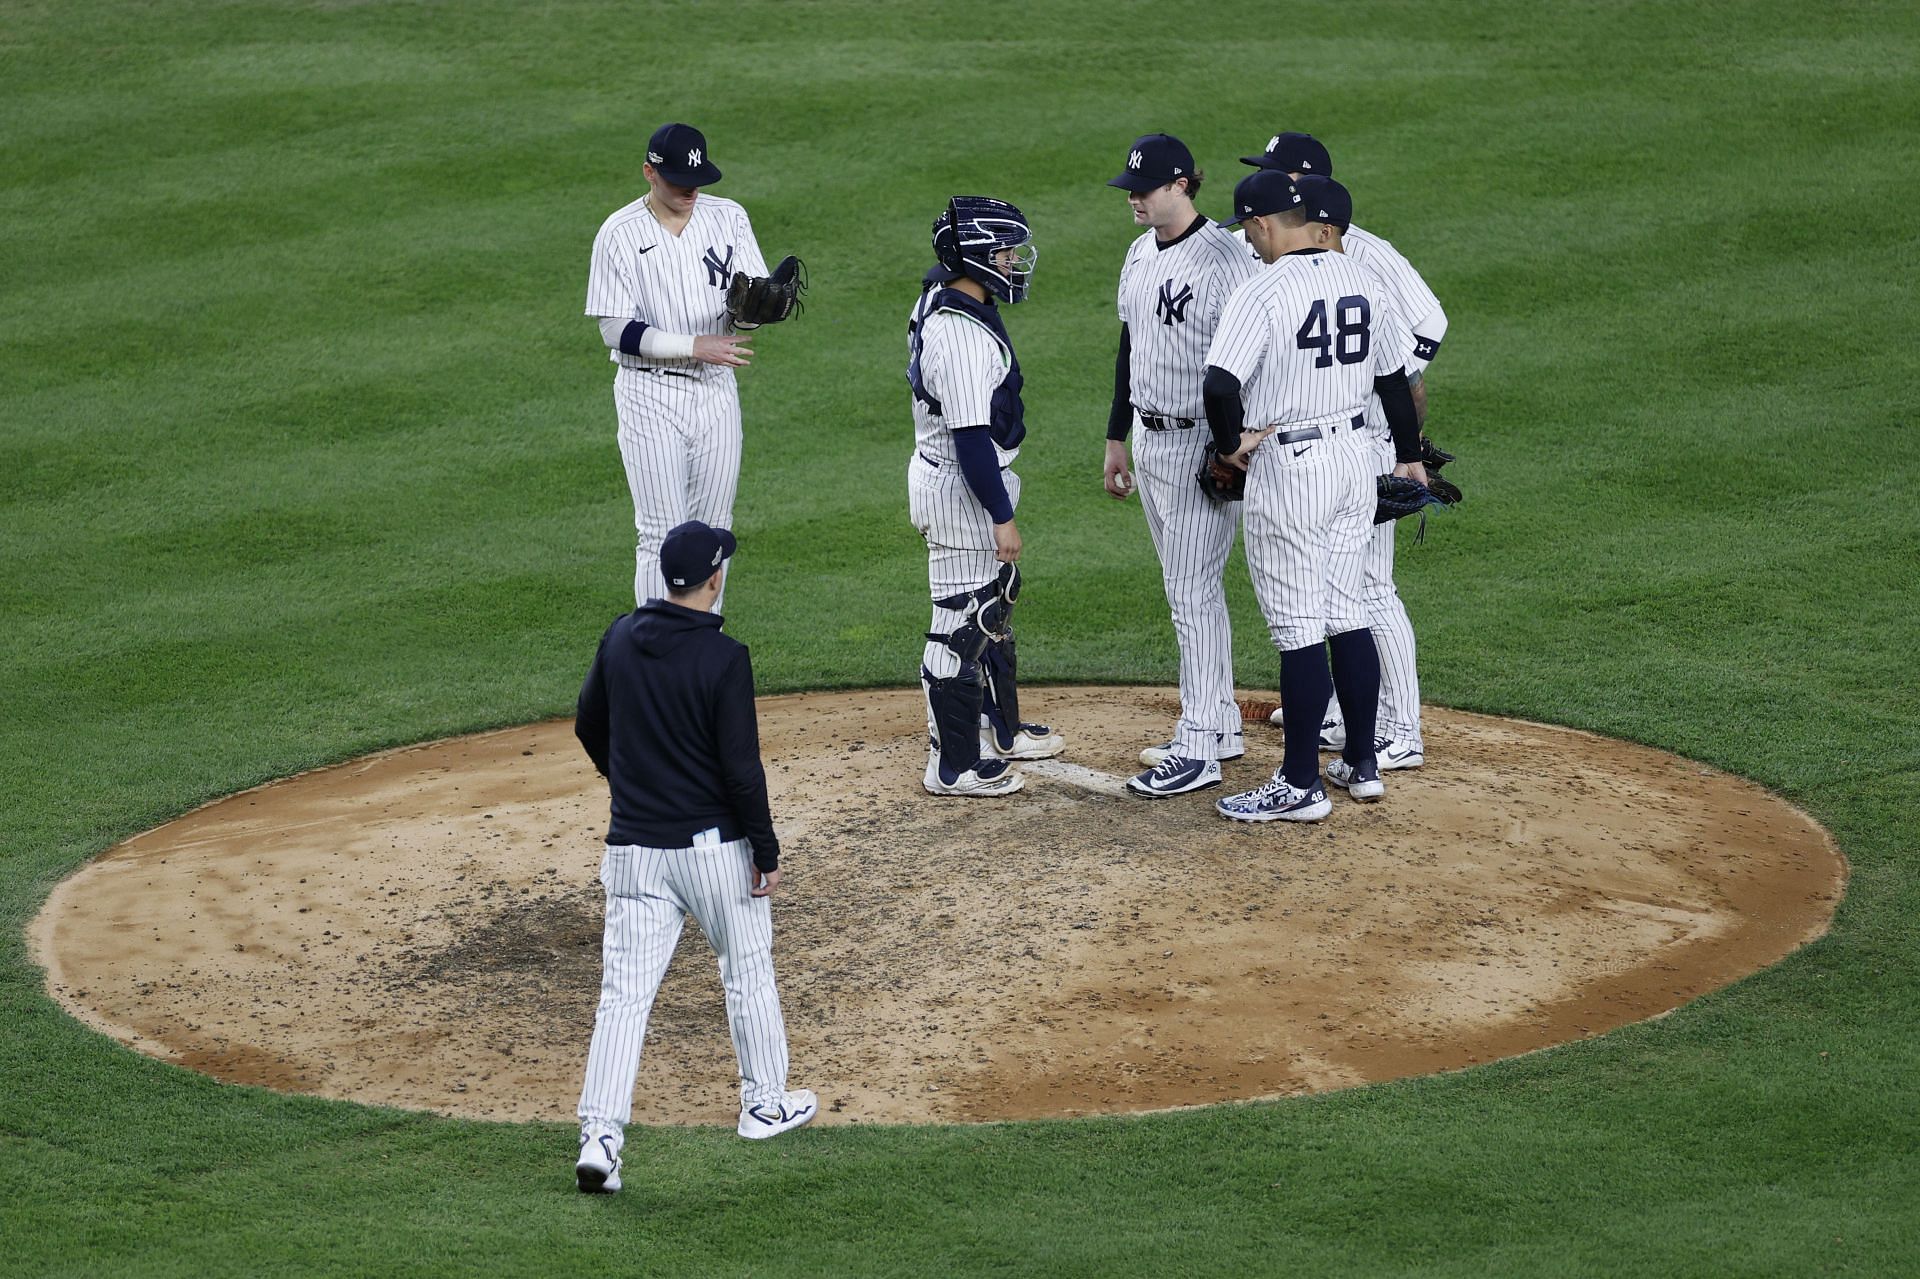 Yankees' Lou Trivino nearly entered game with wrong jersey